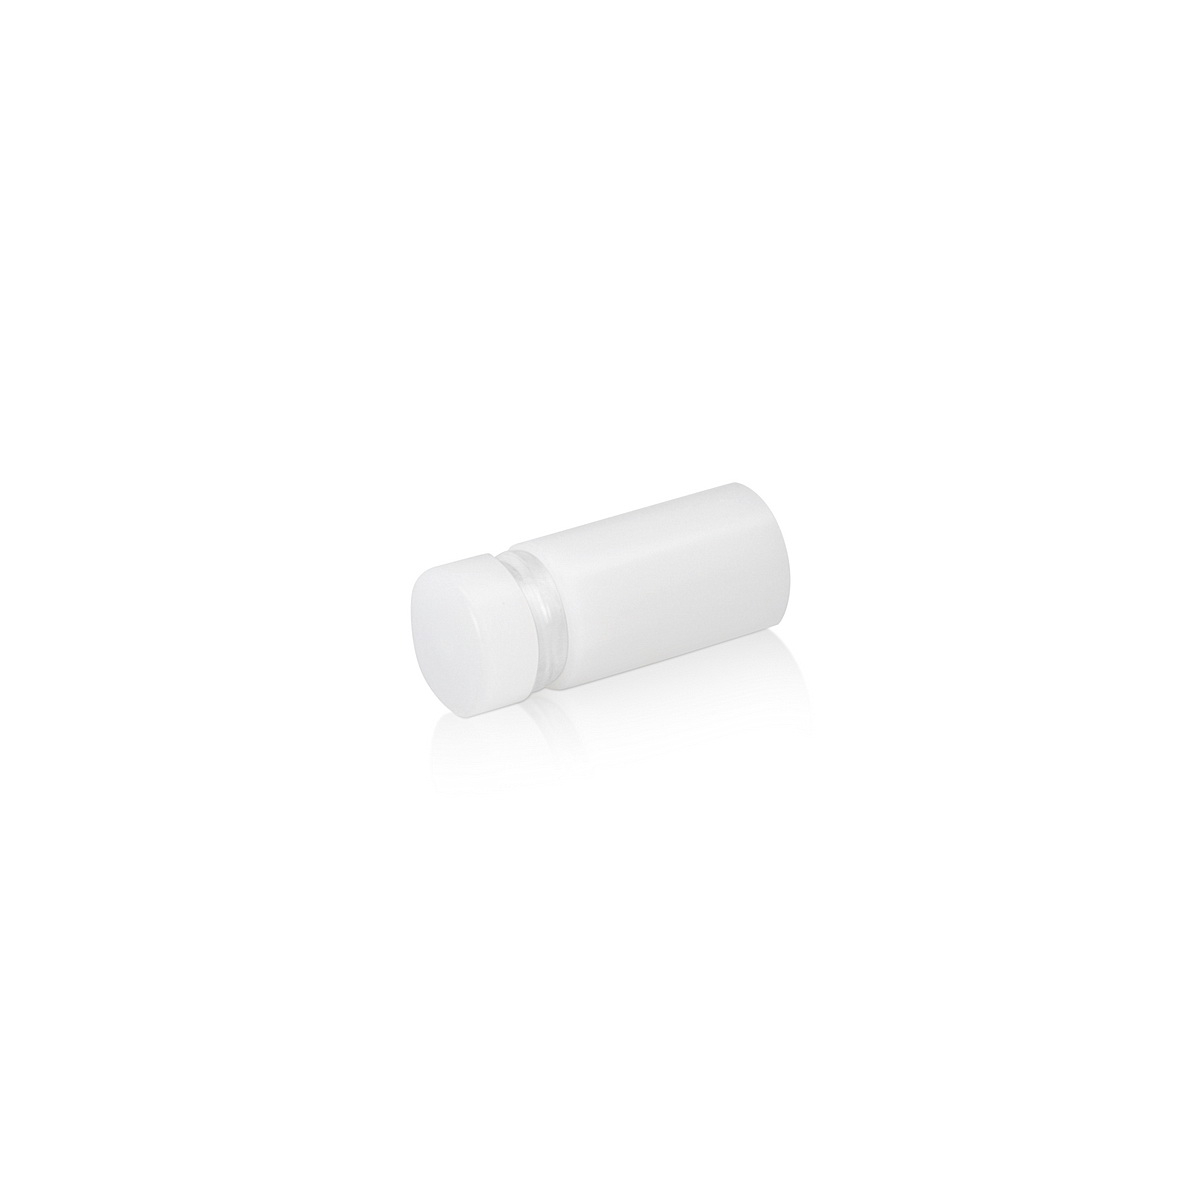 1/2'' Diameter X 1-3/4'' Barrel Length, White Acrylic Standoff. Easy Fasten Standoff (For Inside Use Only) Tamper Proof [Required Material Hole Size: 3/8'']